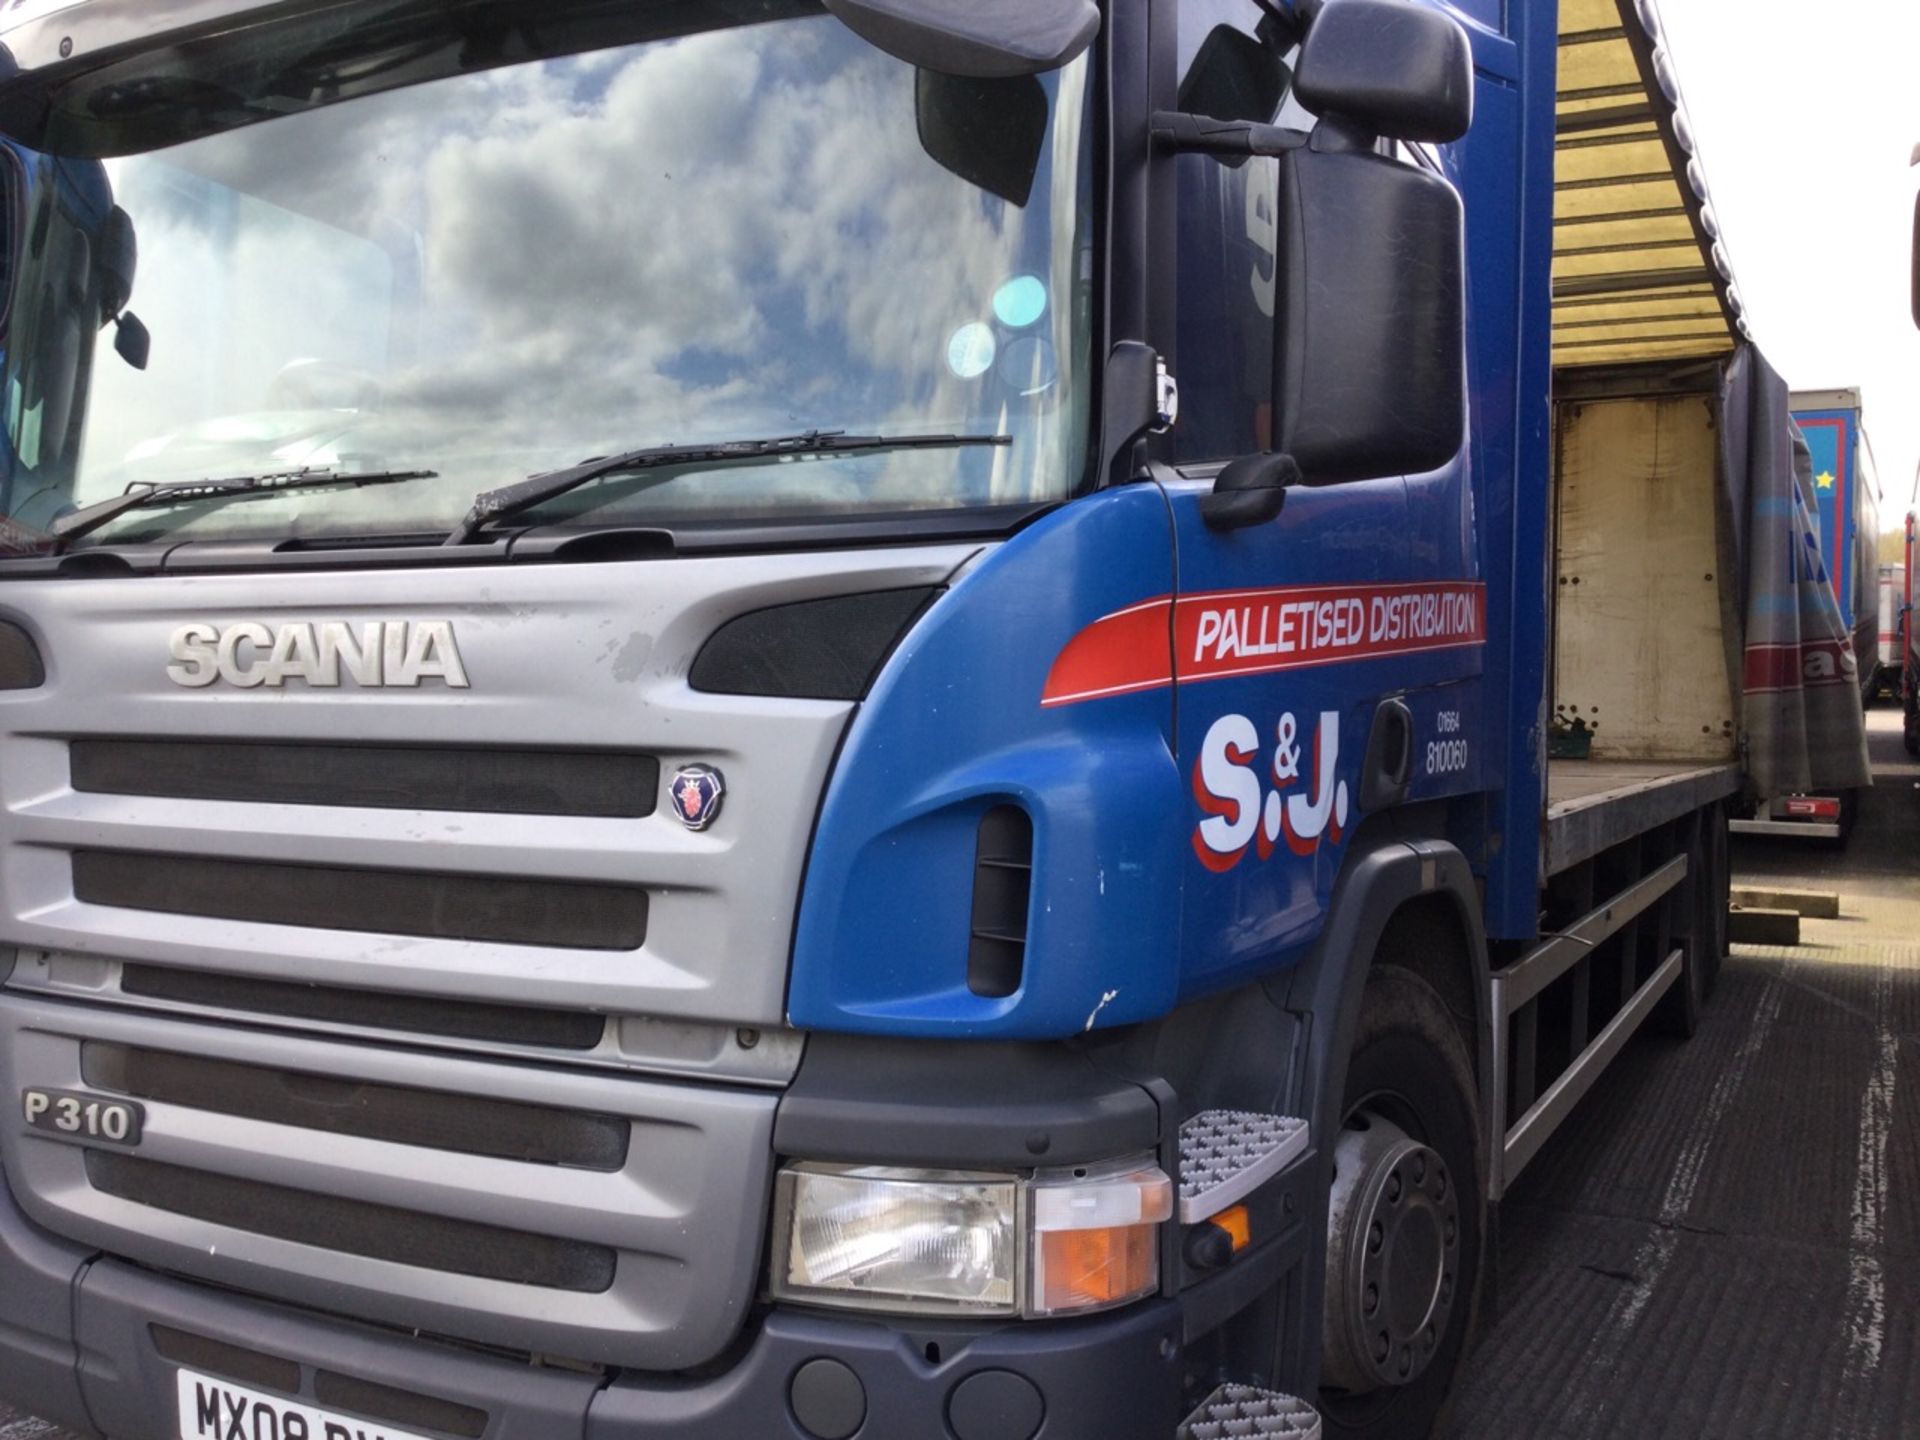 Scania P310-SRS D-CLASS 6x2 Curtainsider With Tail Lift 887401kms Mot No Details, Registration numb - Image 2 of 4